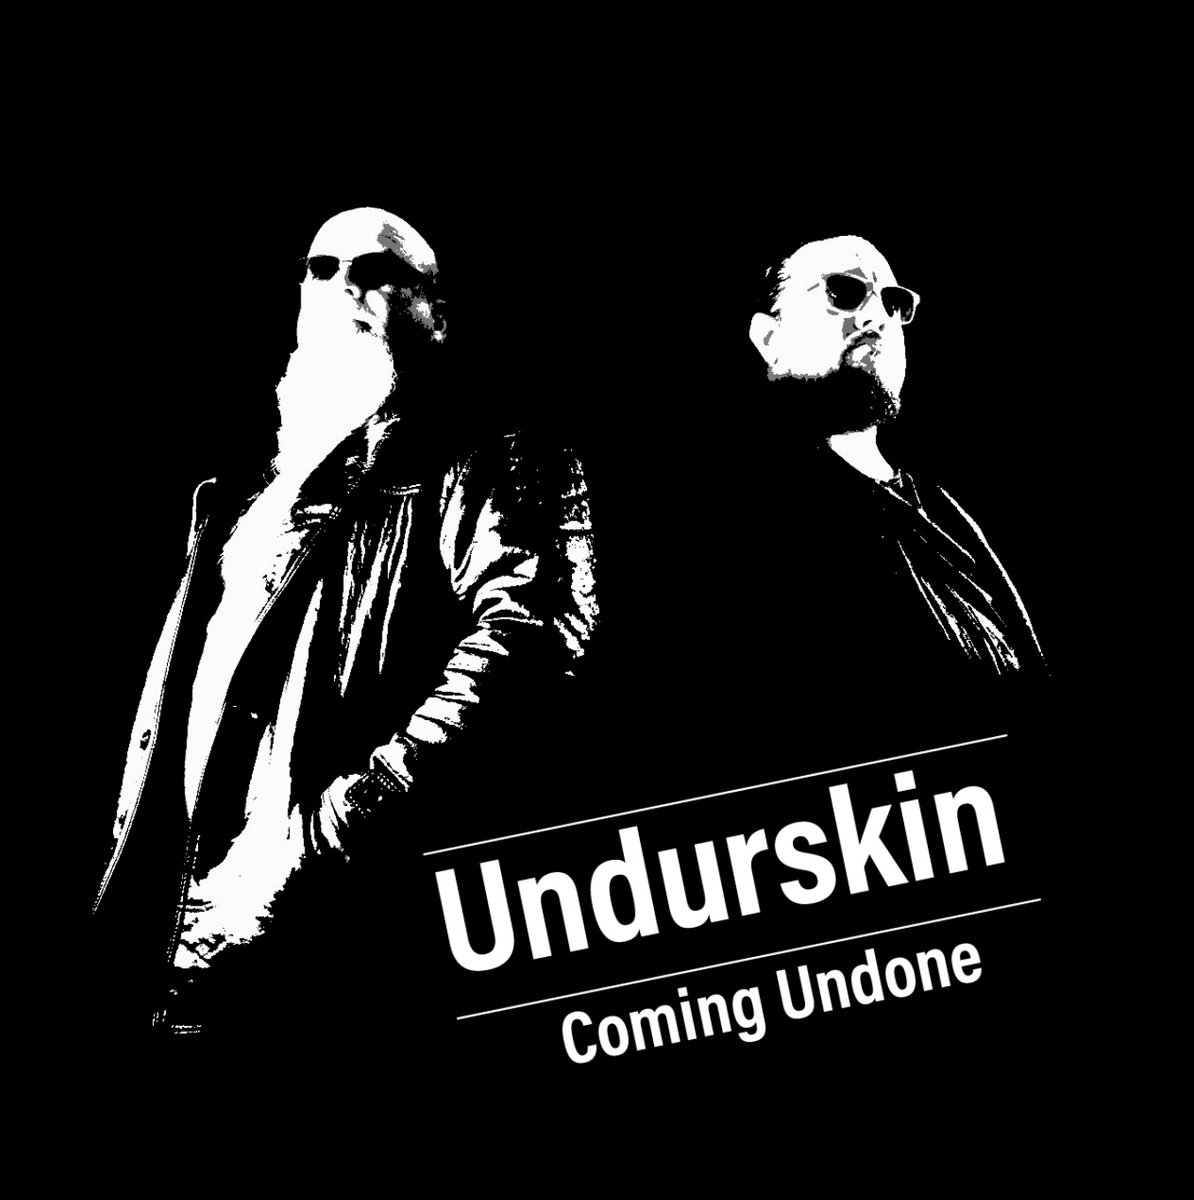 MM Radio bringing you 100% pure eargasm with Coming Undone thanks to @undurskin Listen here on mm-radio.com